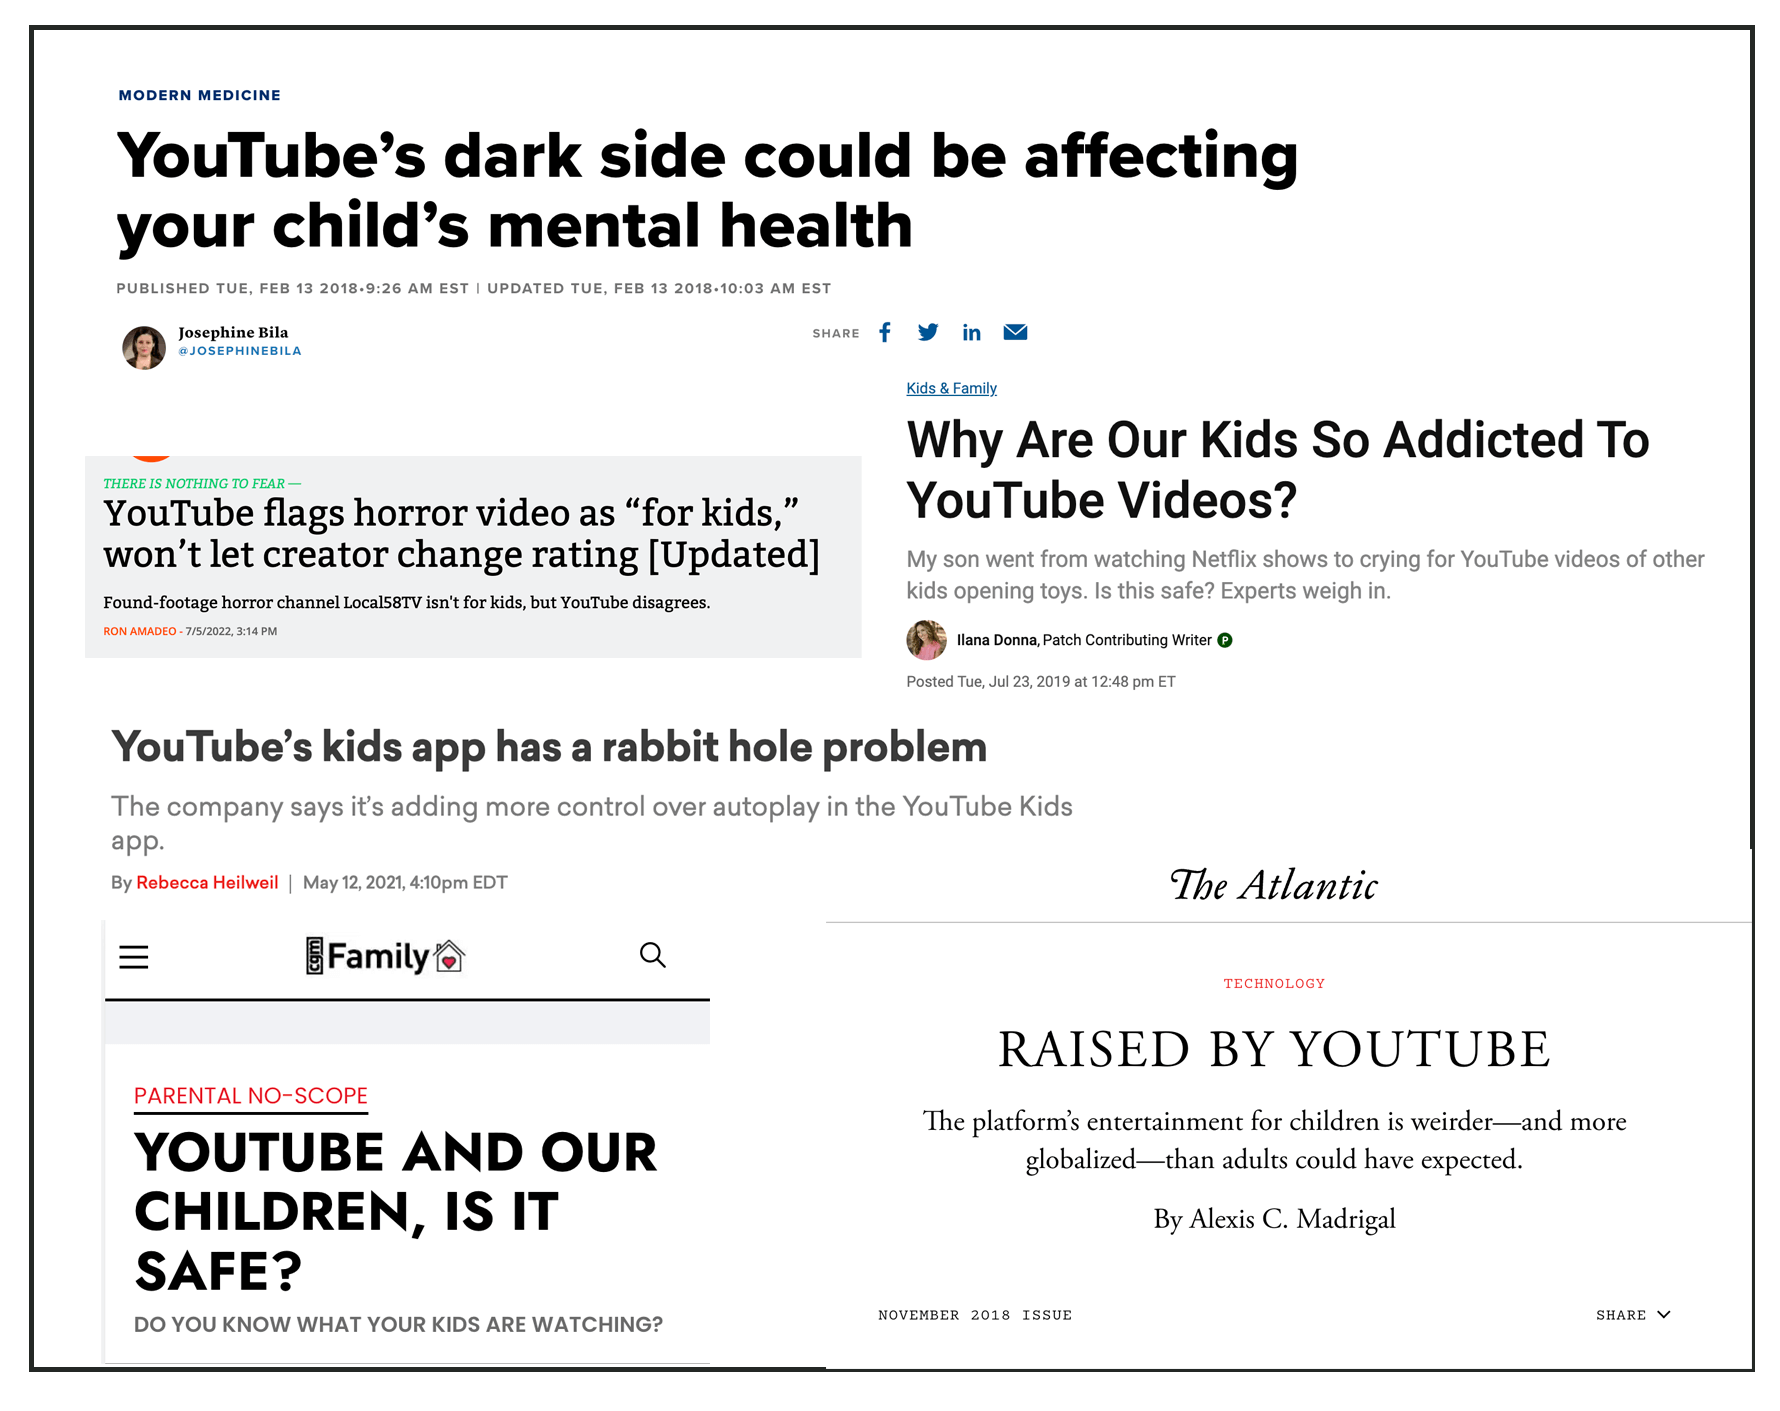 YouTube is poisoning your child